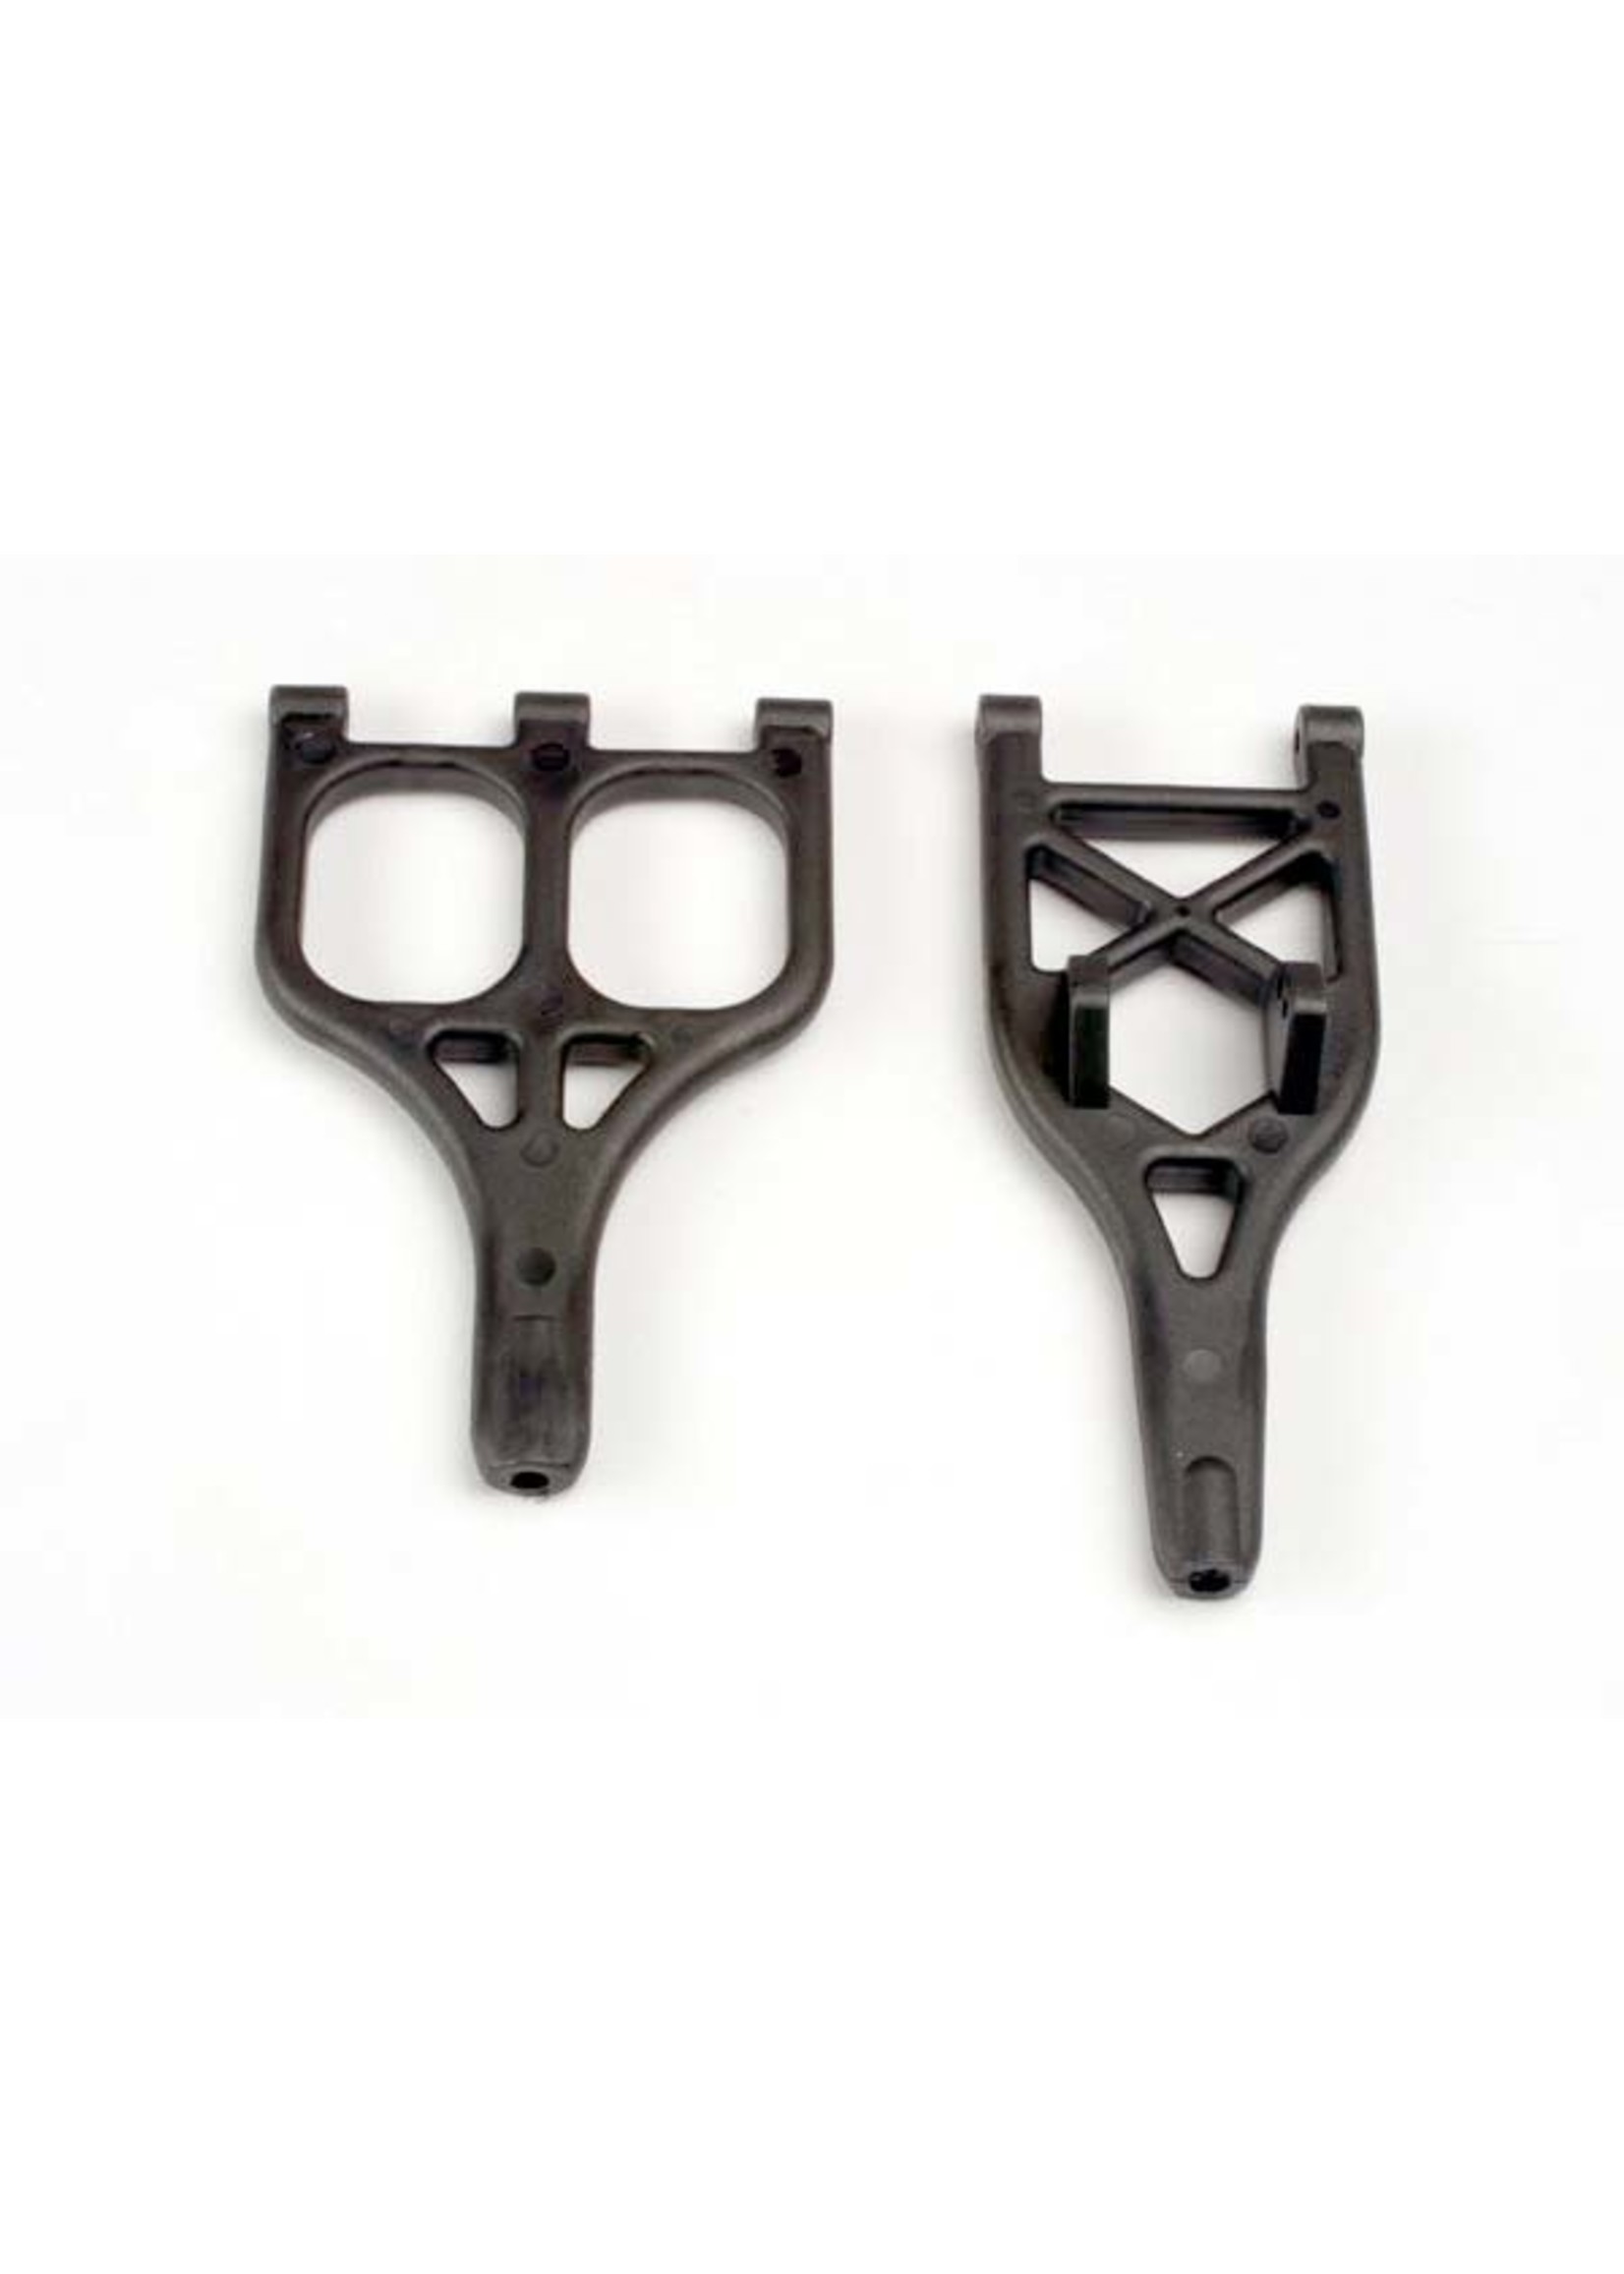 Traxxas 4931 - Suspension Arms, Upper & Lower